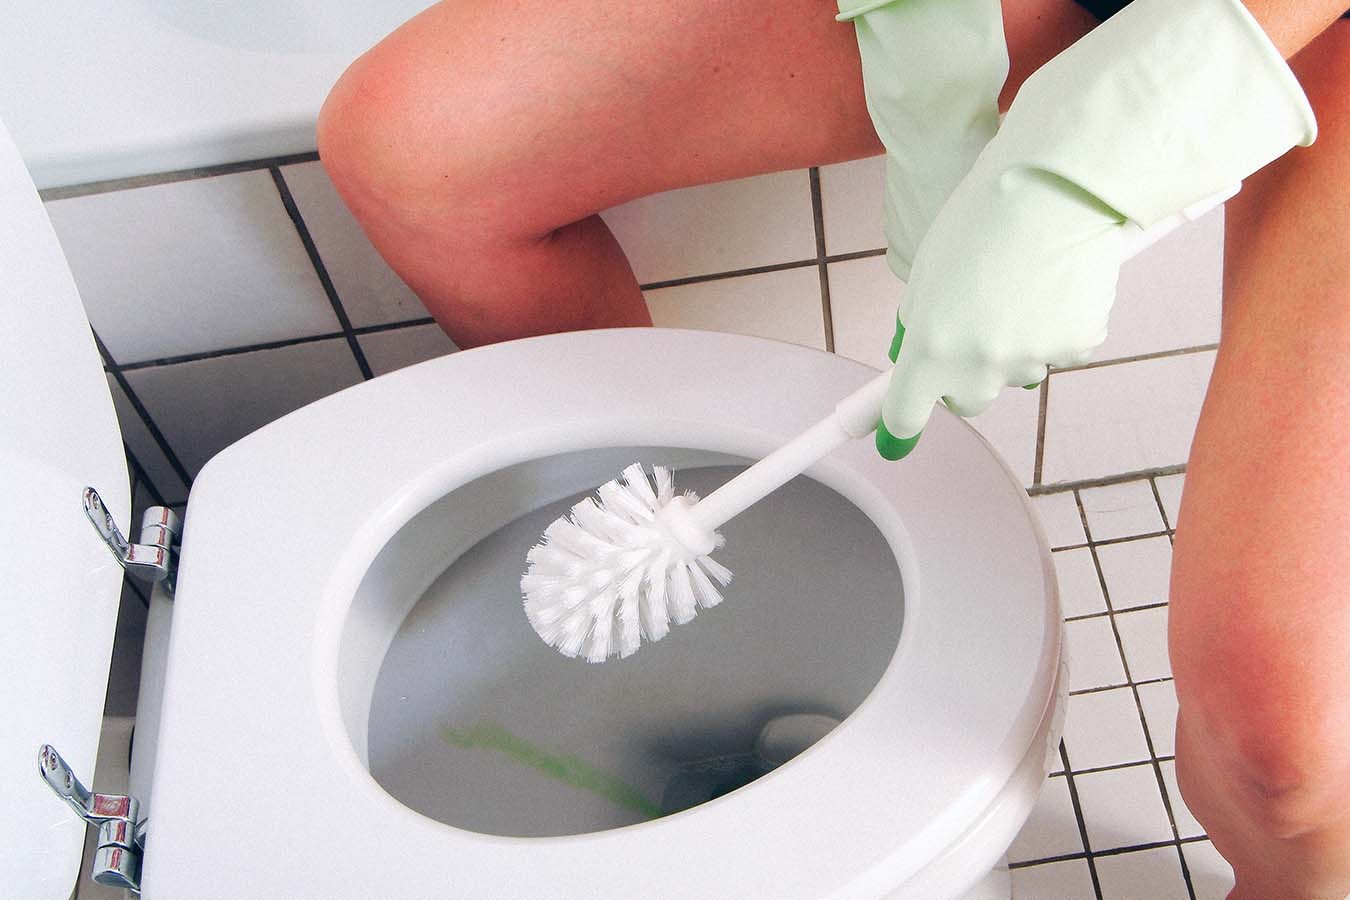 How To Remove And Prevent Toilet Seat Discoloration